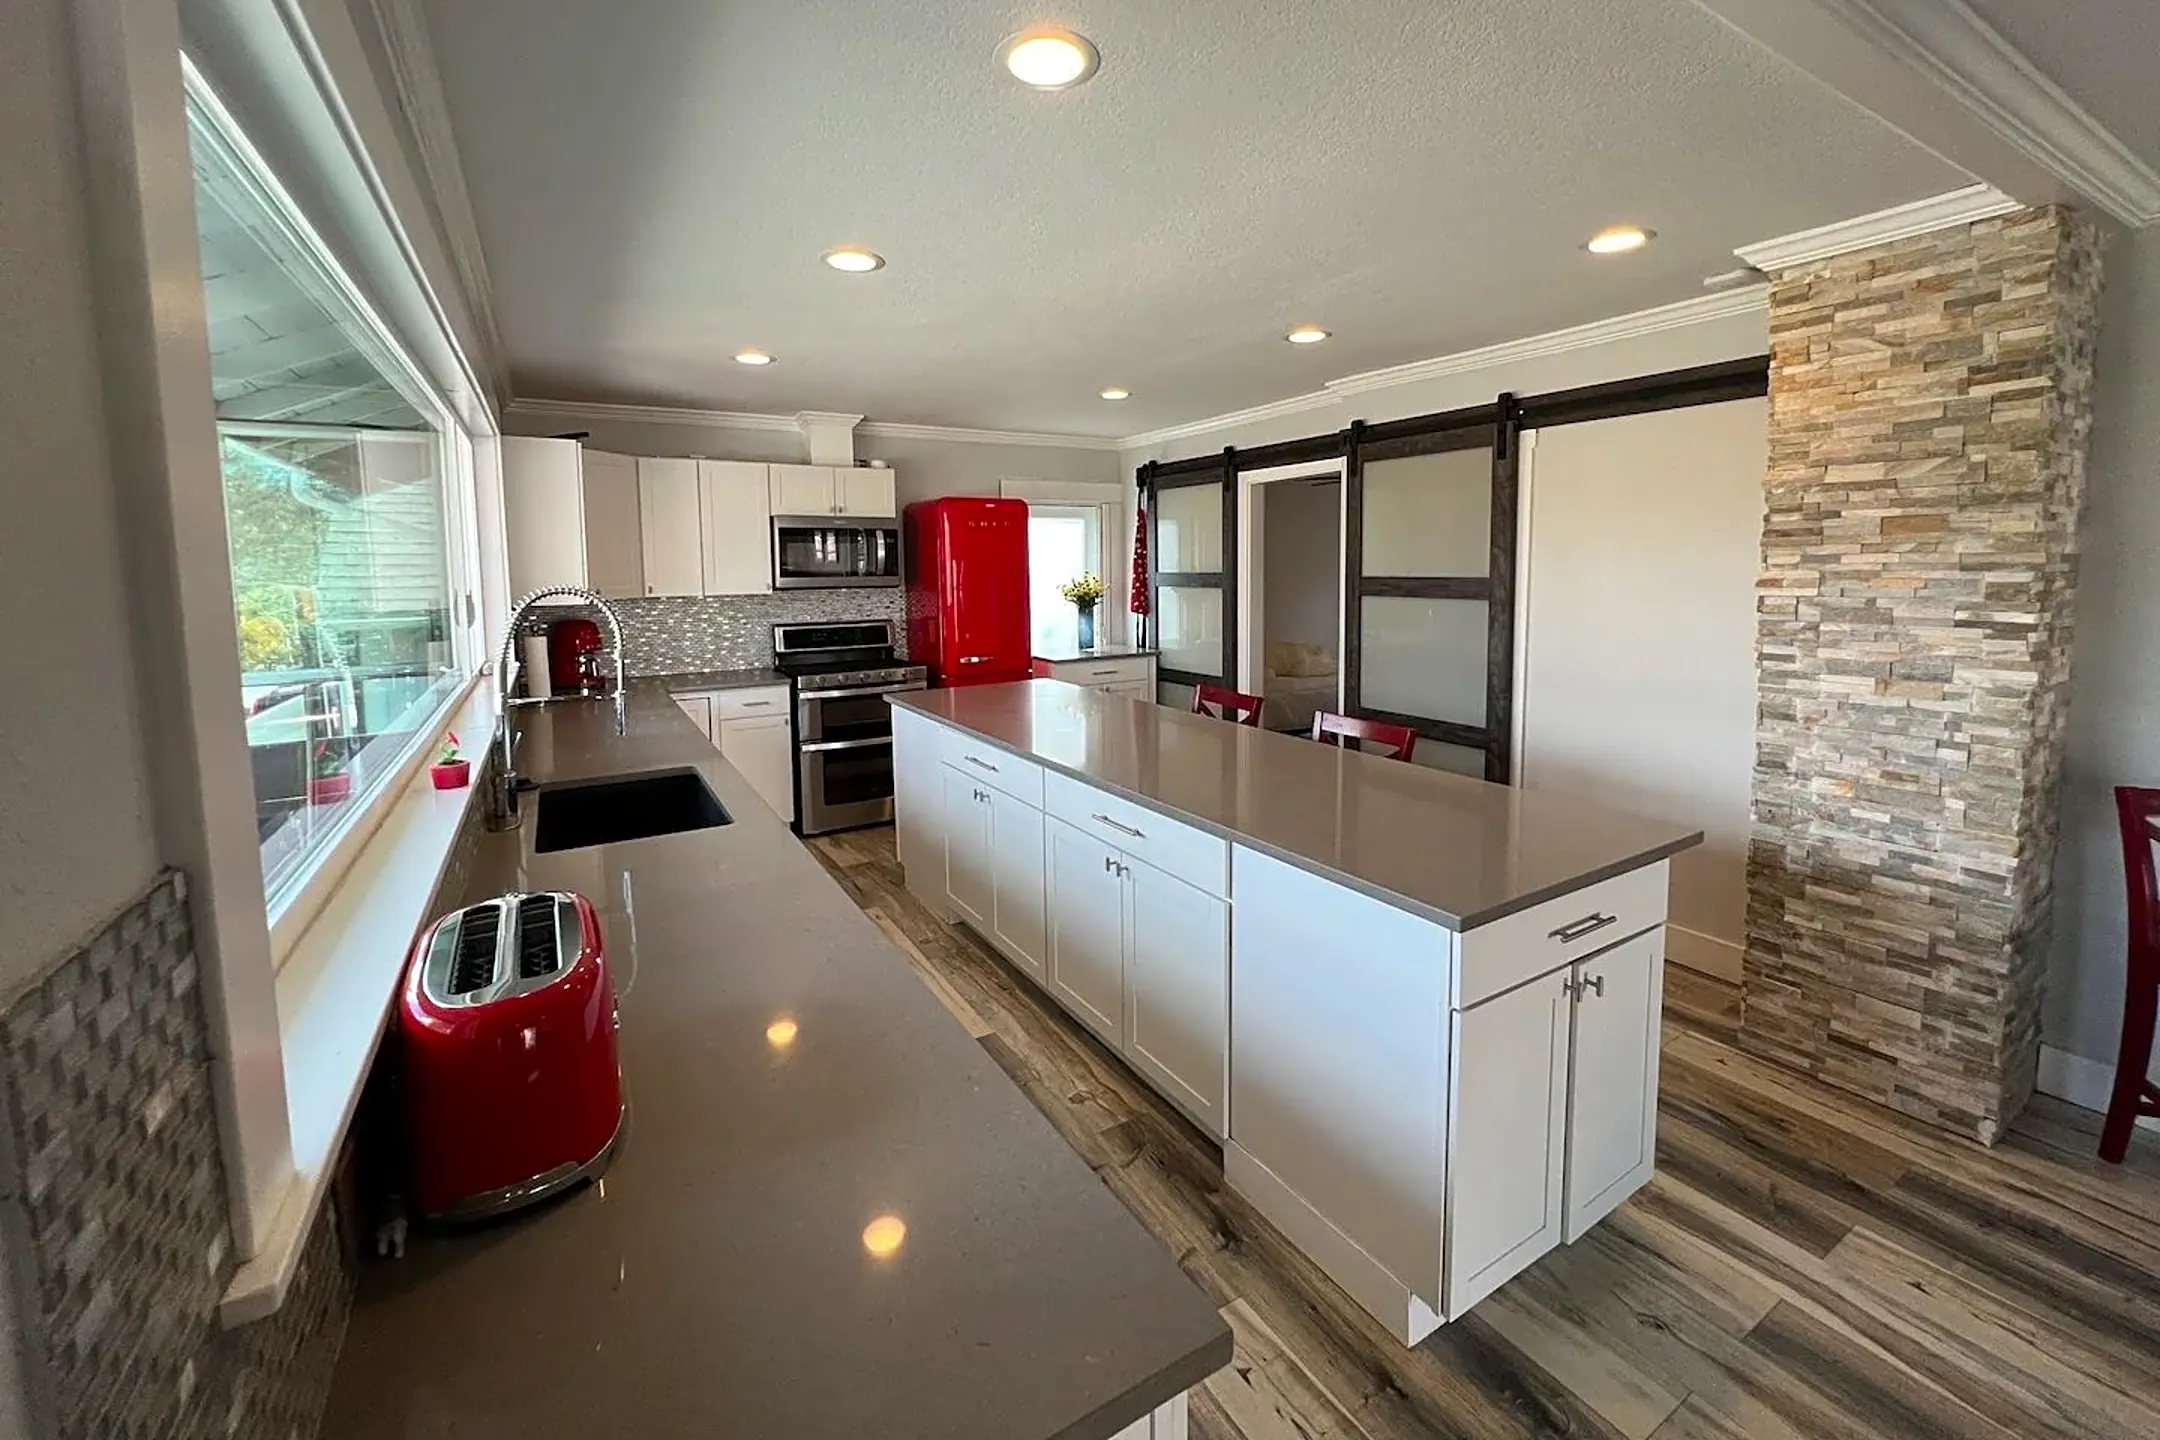 Kitchen - 1395 NW Grove Rd - Bend, OR